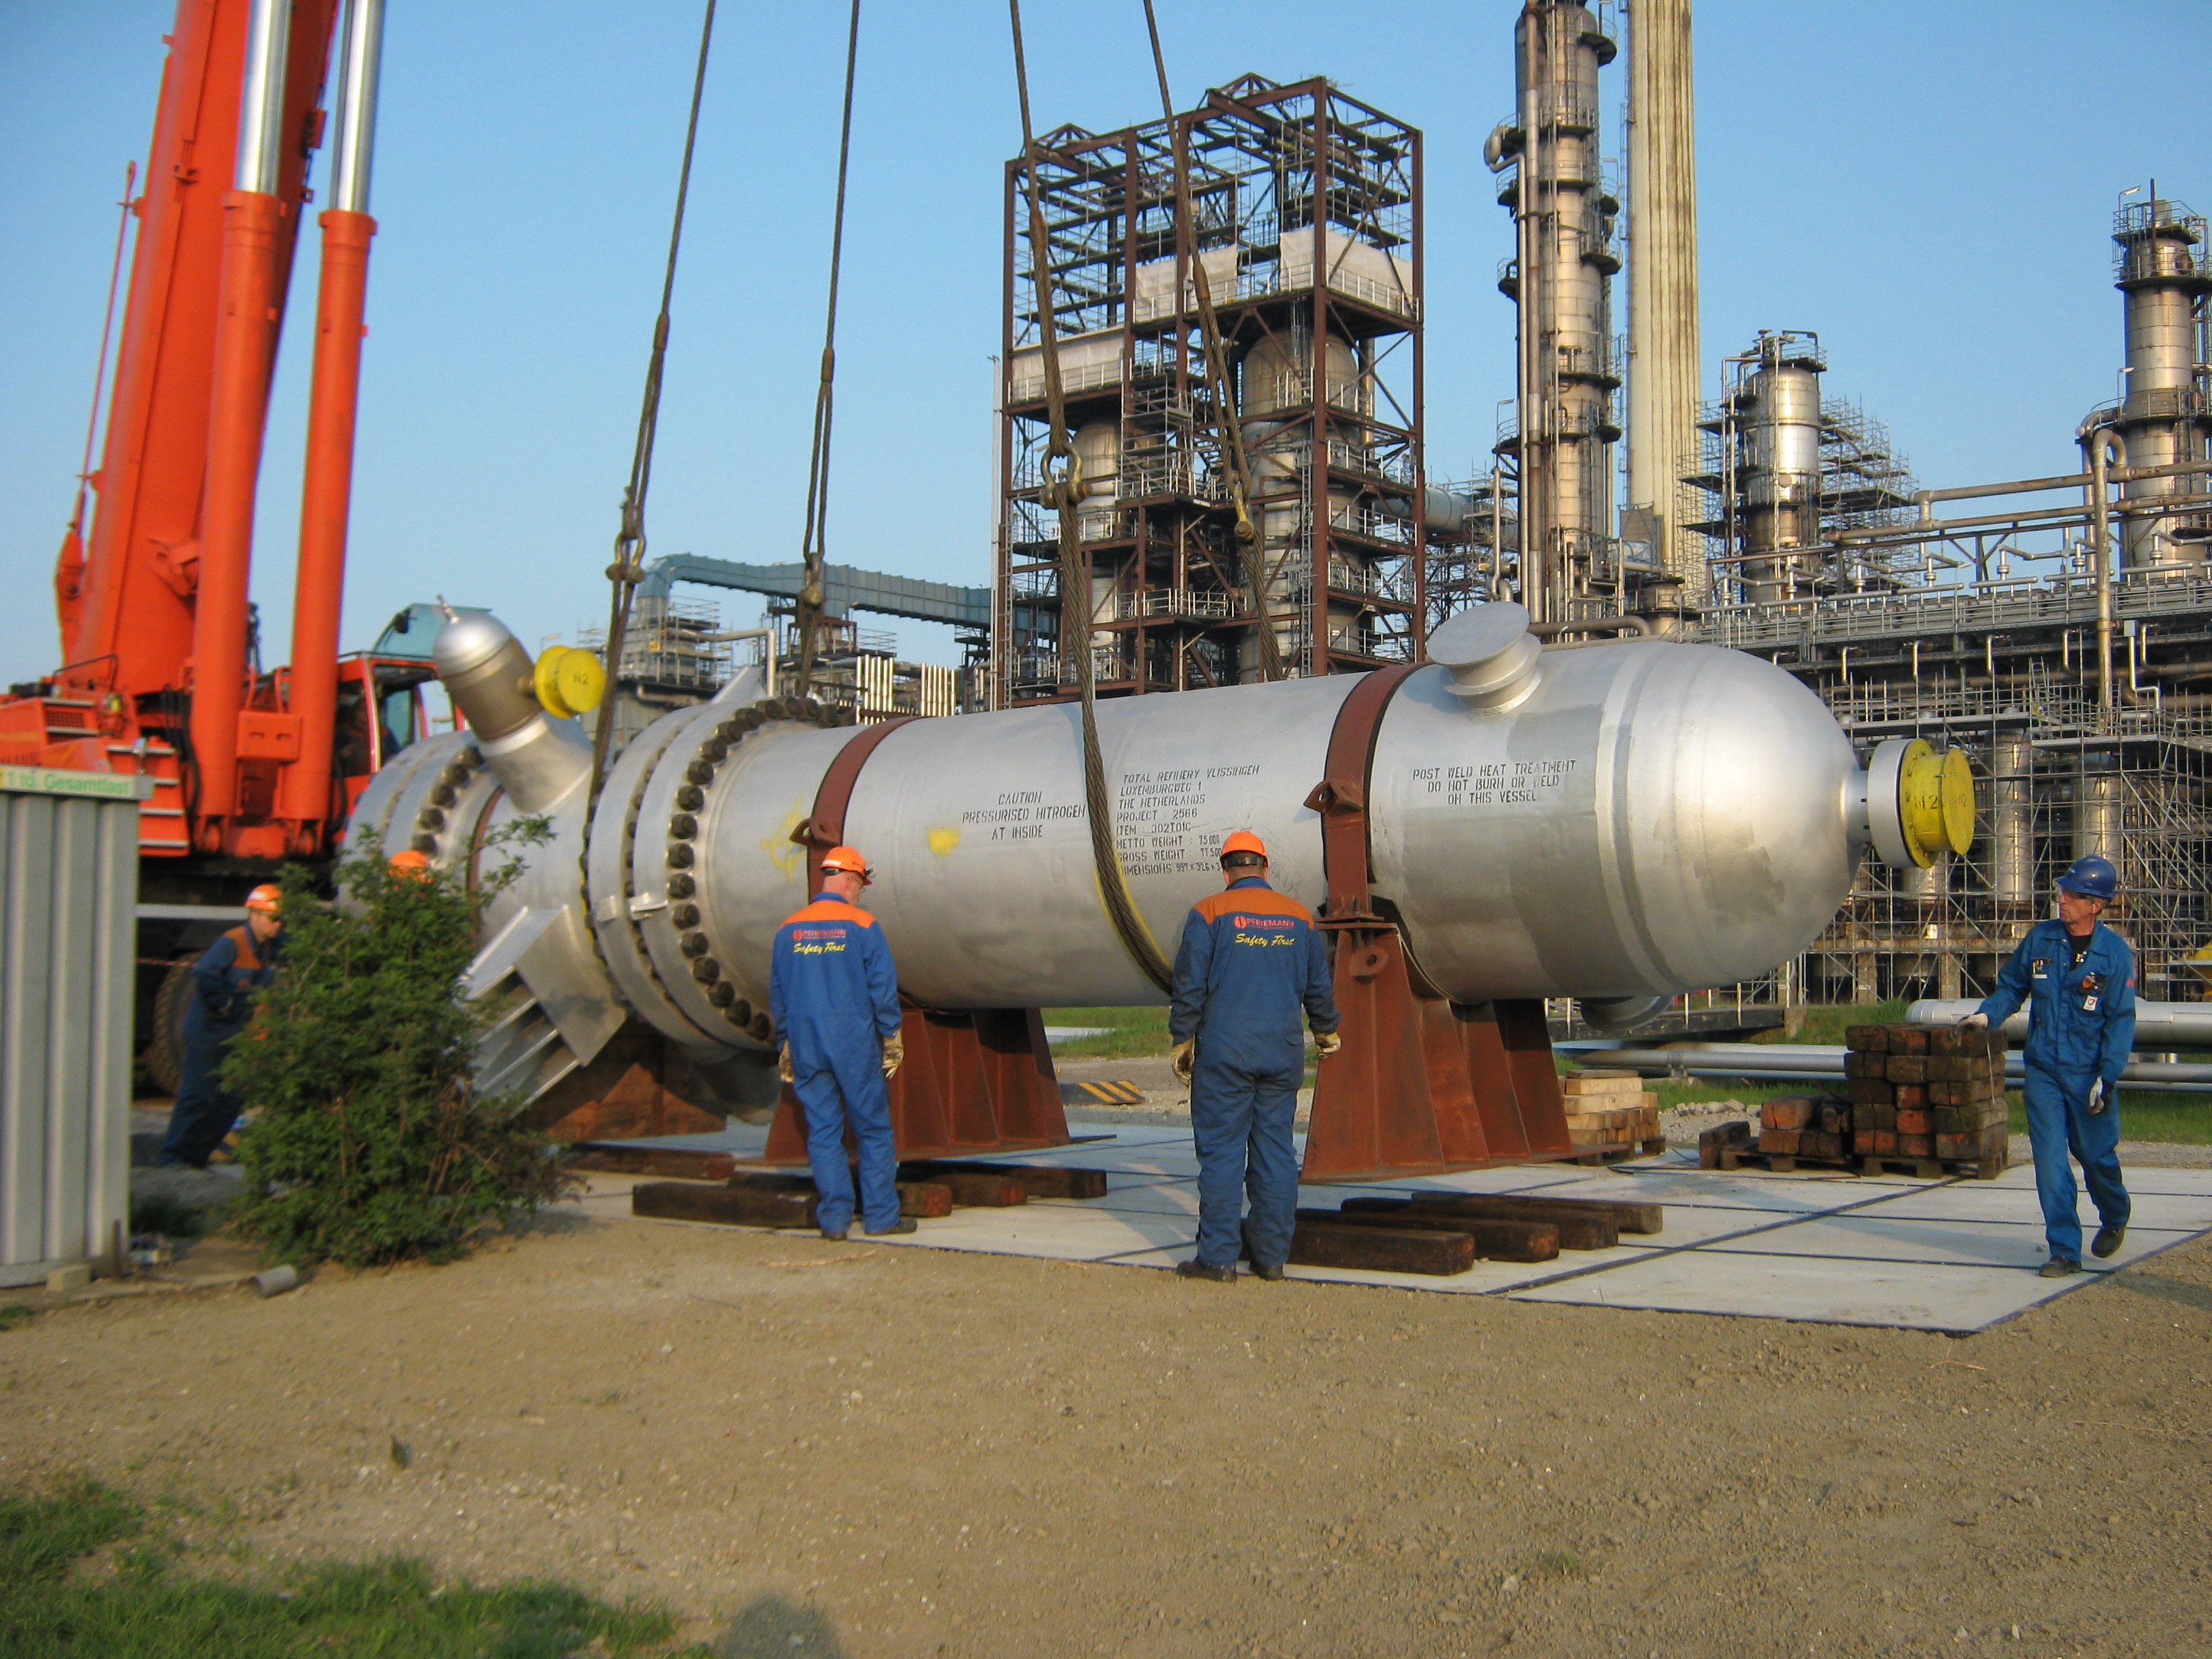 Shell & tube heat exchanger for hydrocracking process